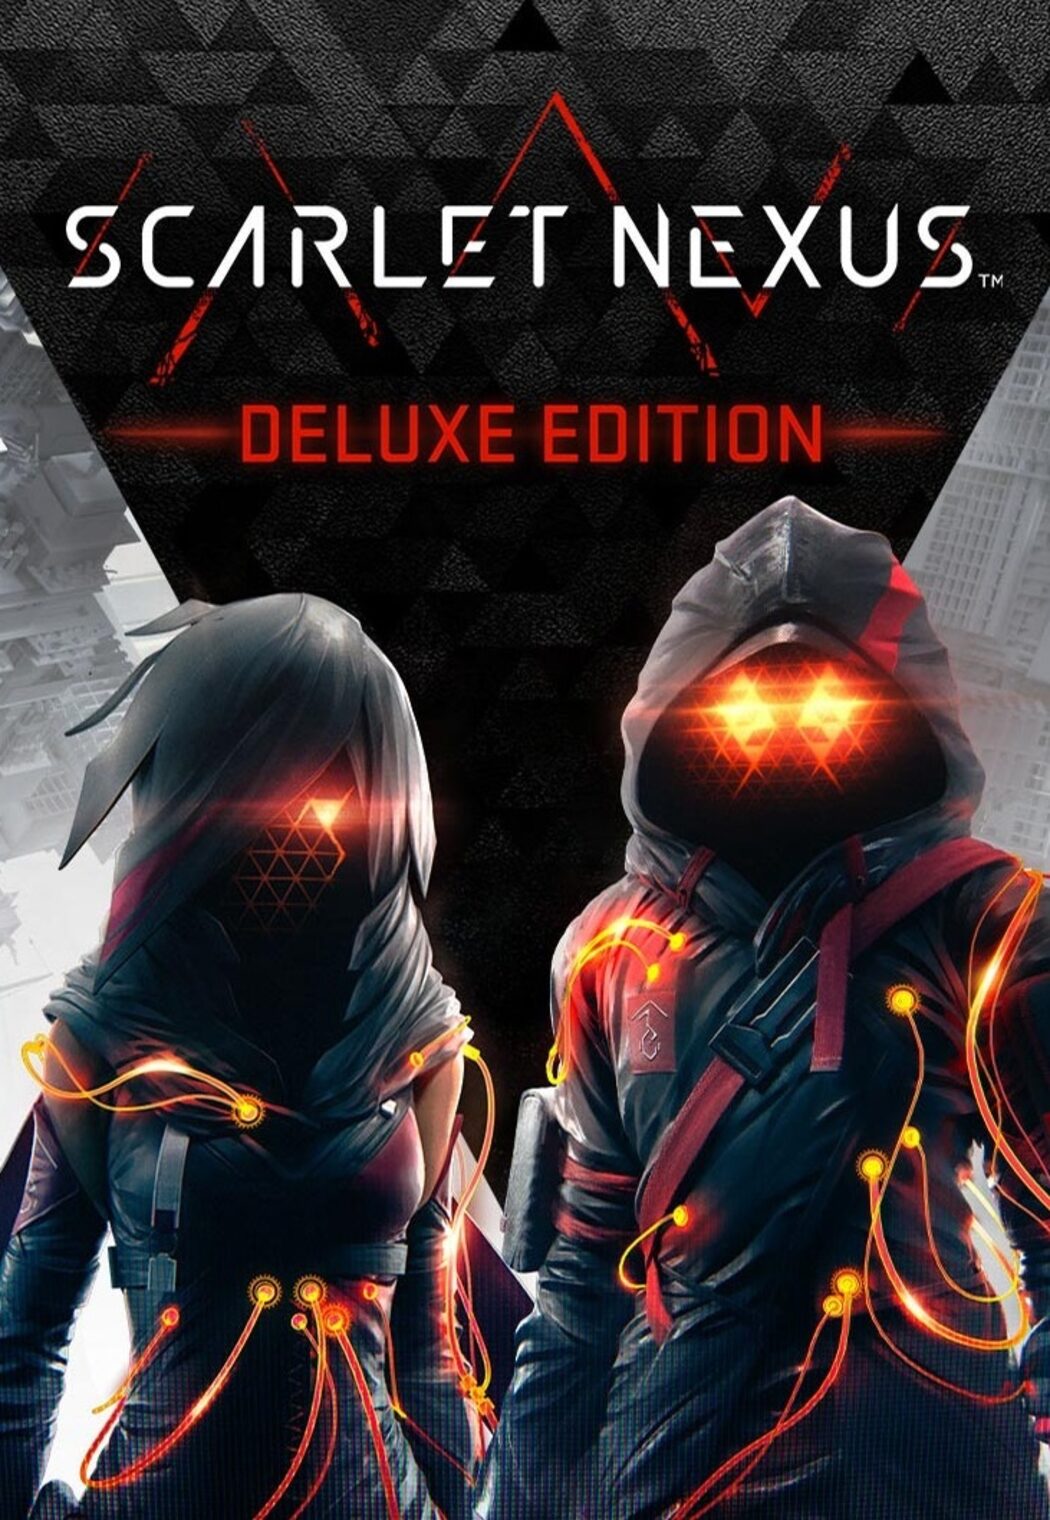 SCARLET NEXUS Ultimate Edition, PC Steam Game